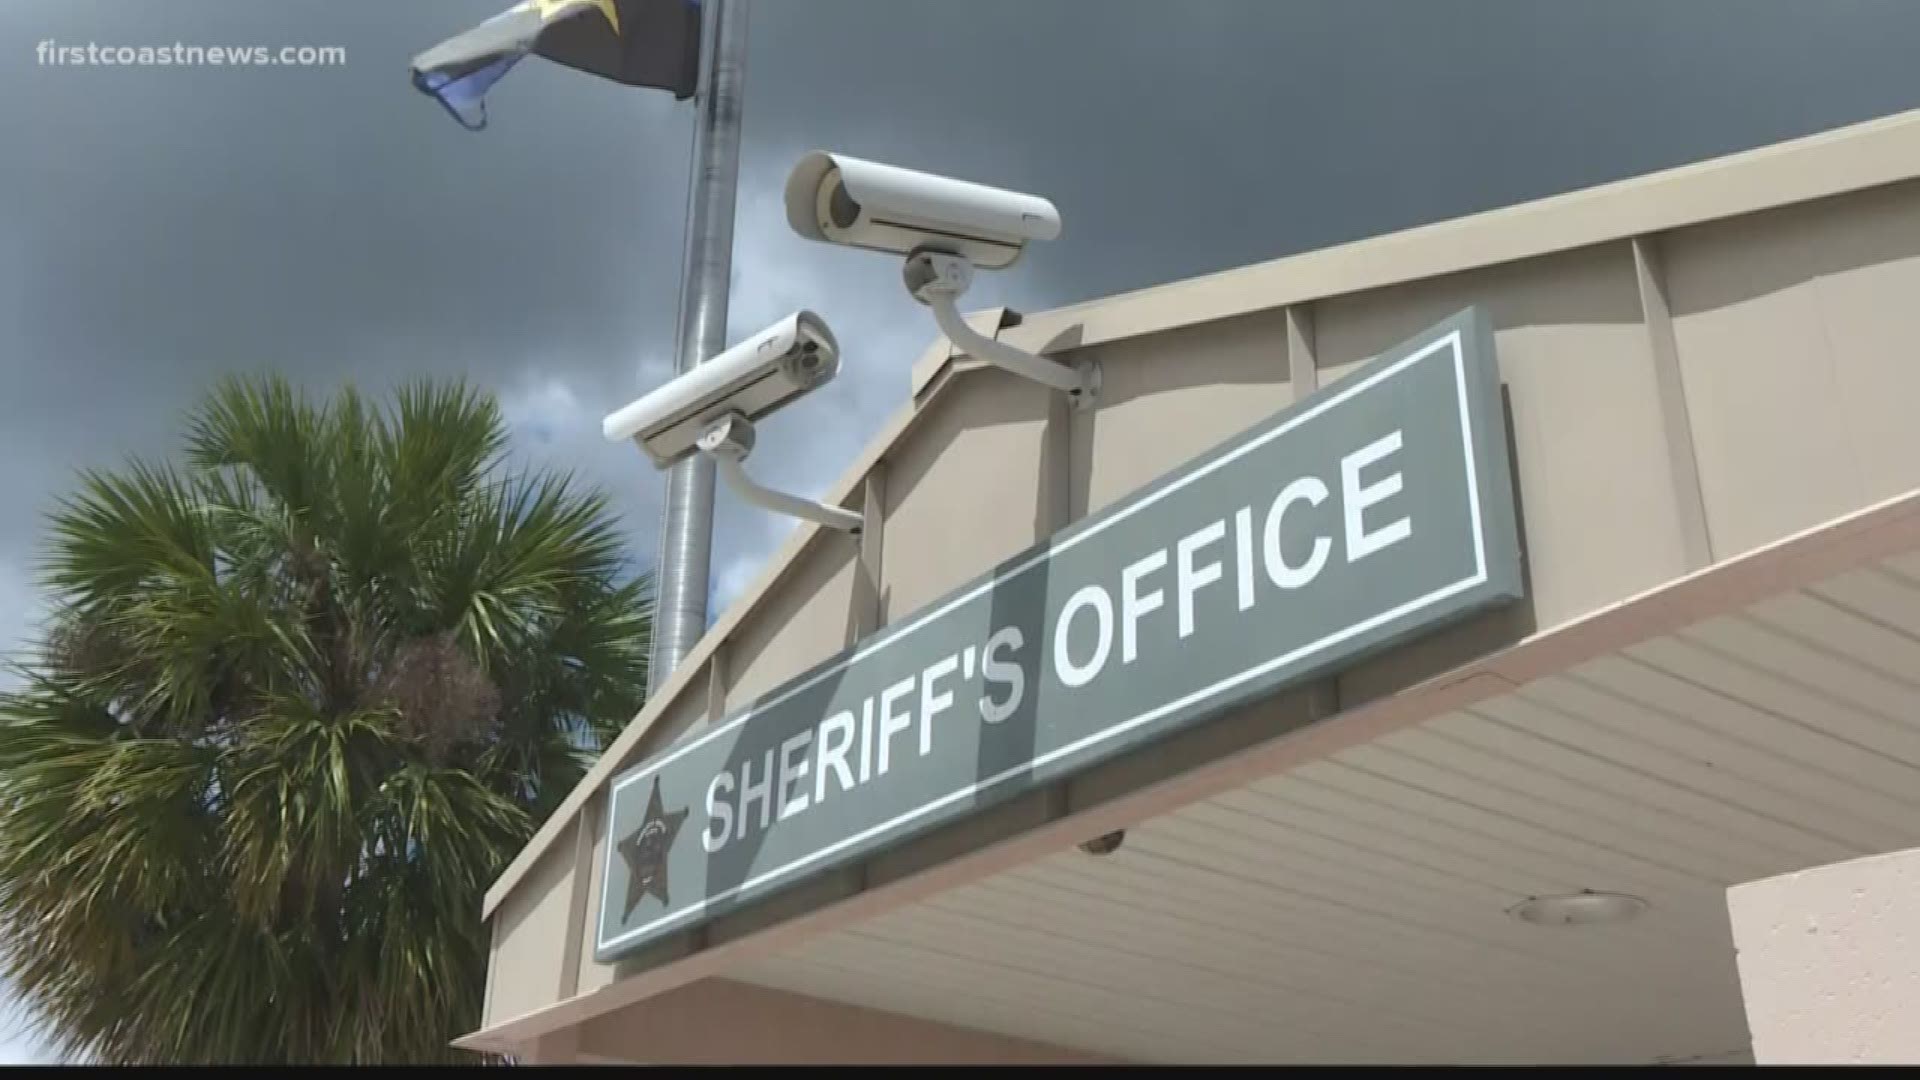 It connects people, especially those who have surveillance cameras, with each other and with law enforcement.